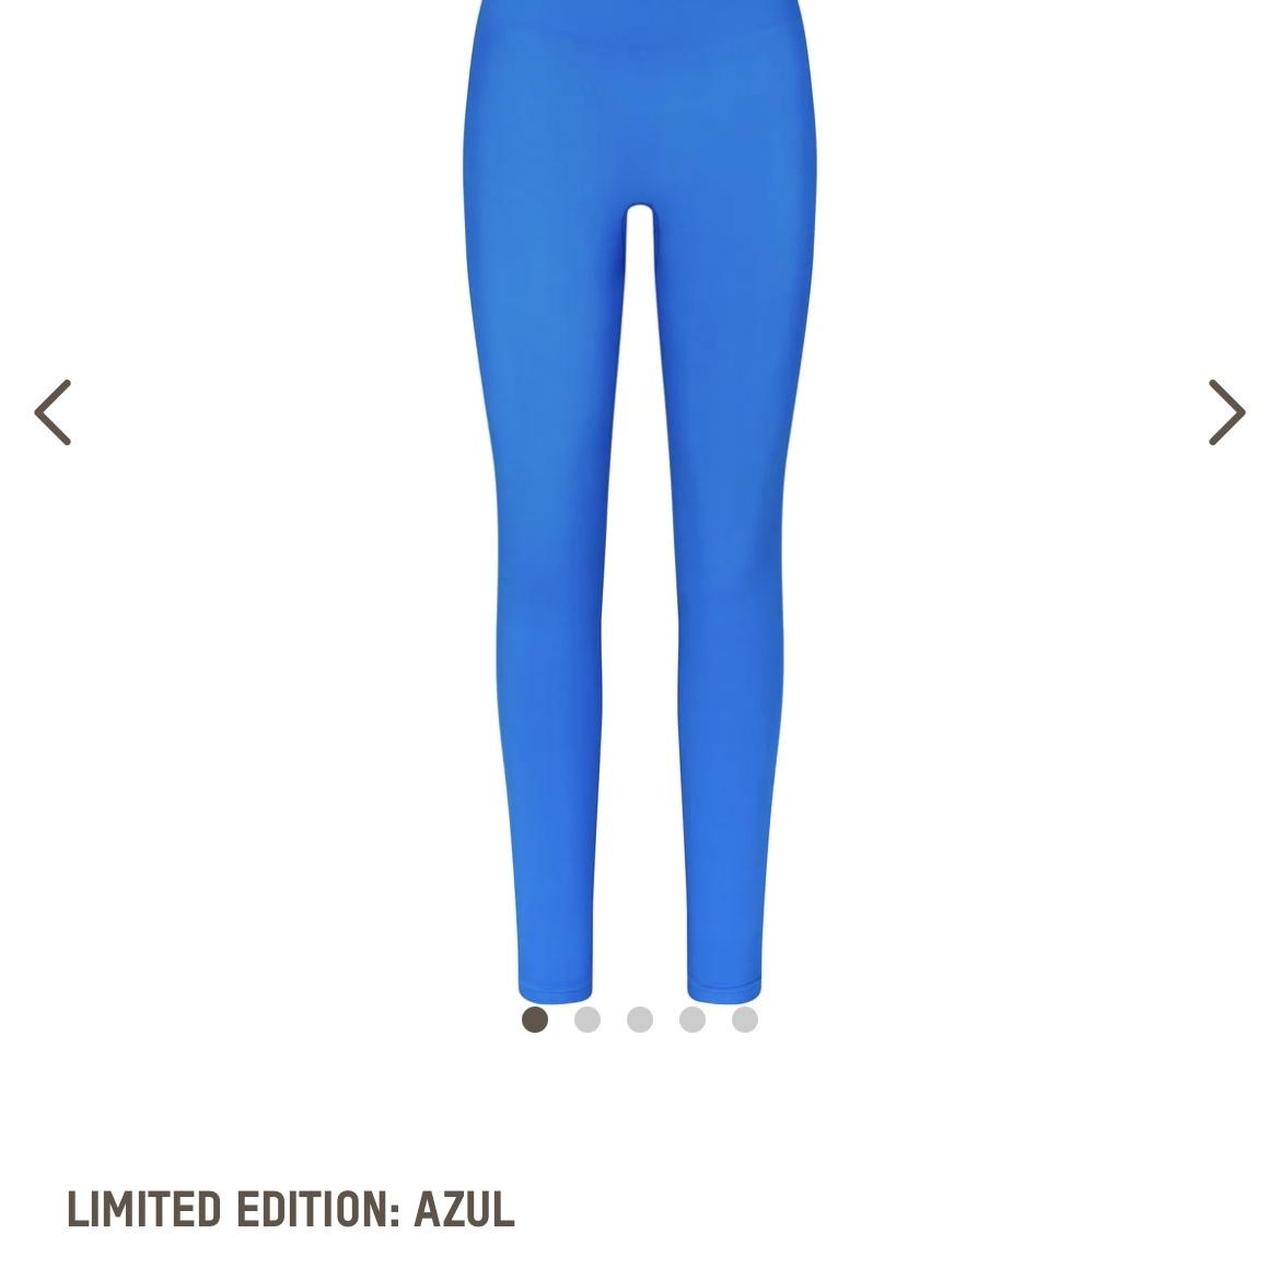 Skims soft smoothing leggings the color Azul